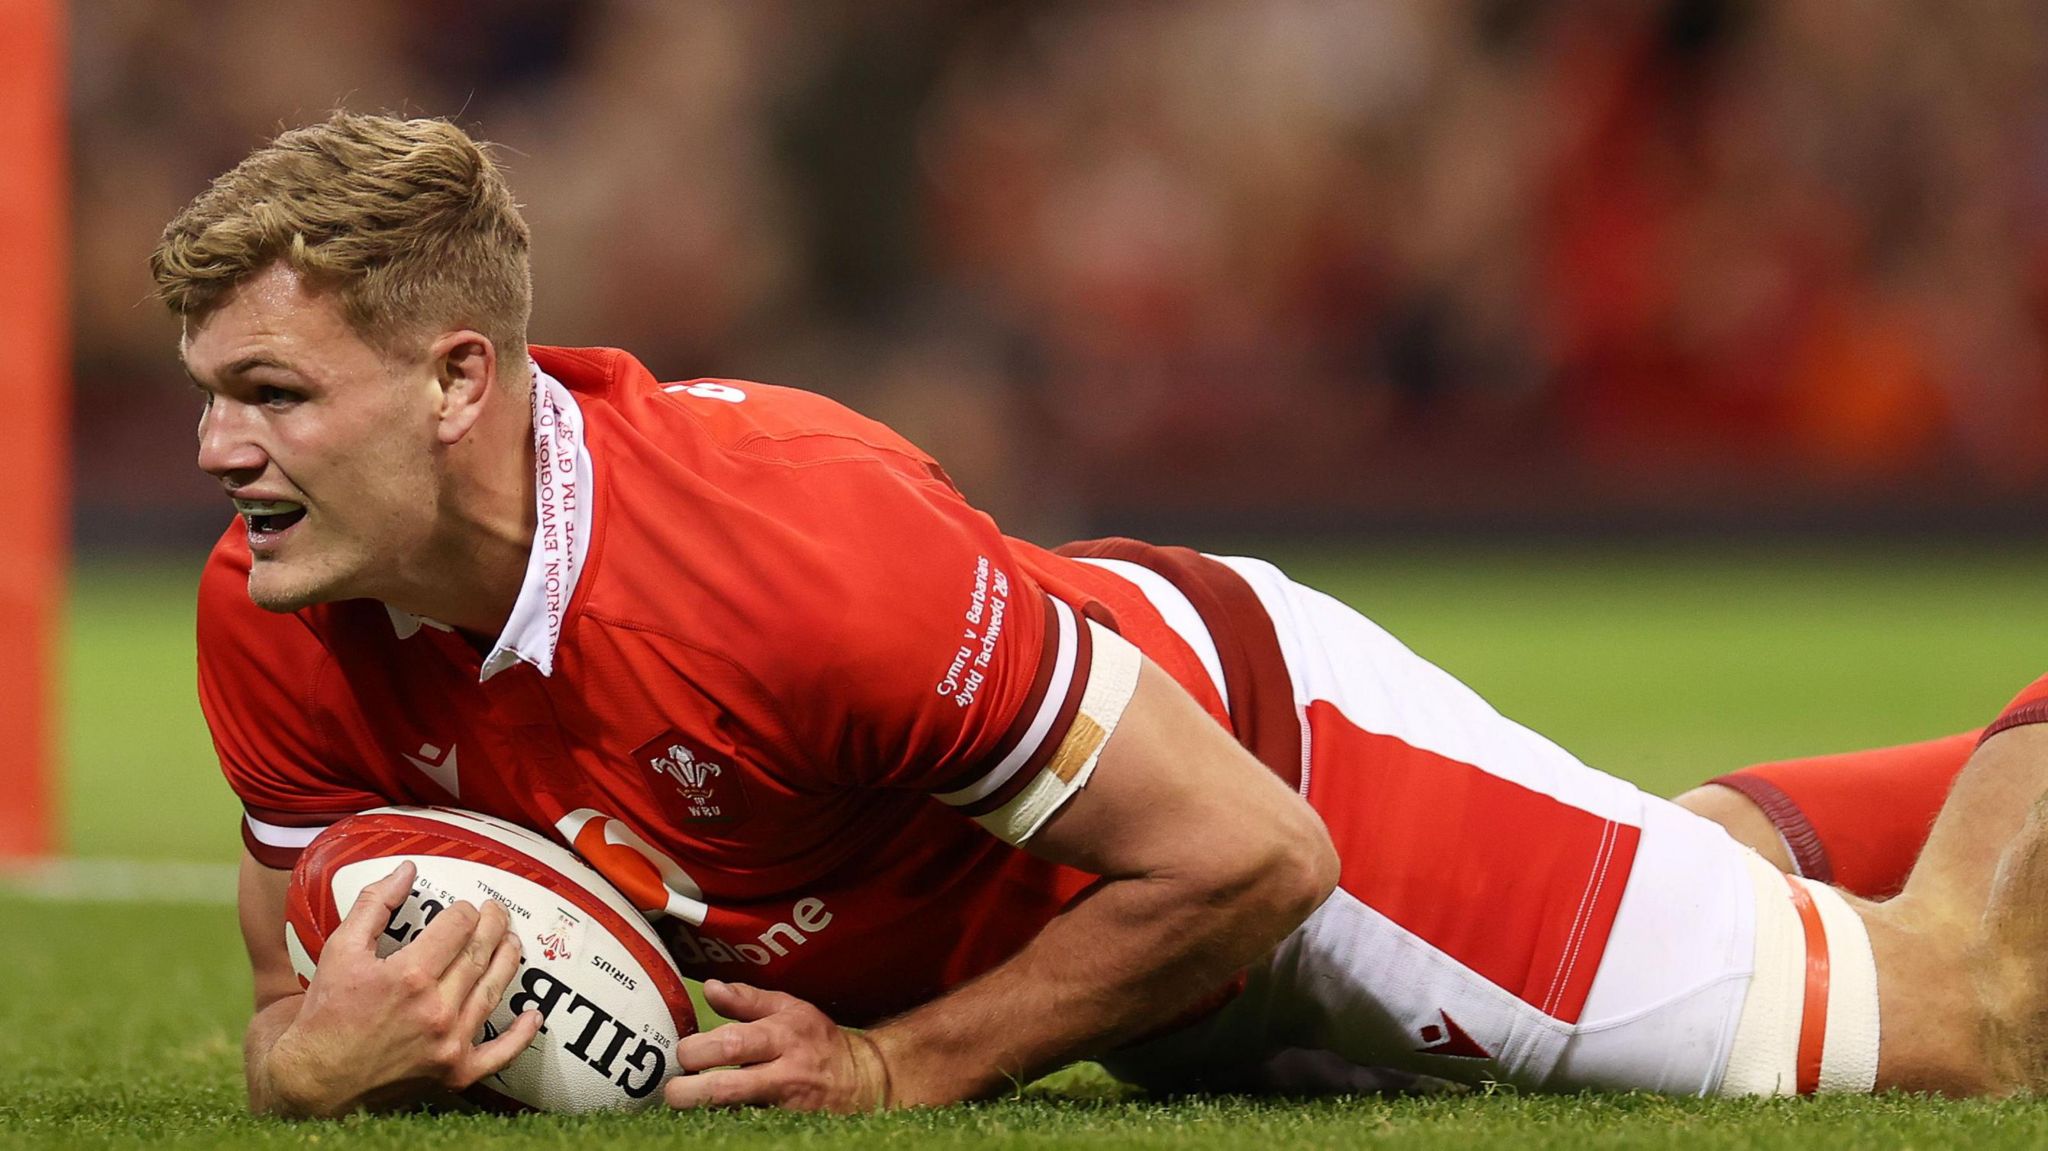 Taine Plumtree scored for Wales in the uncapped match against Barbarians in November 2023